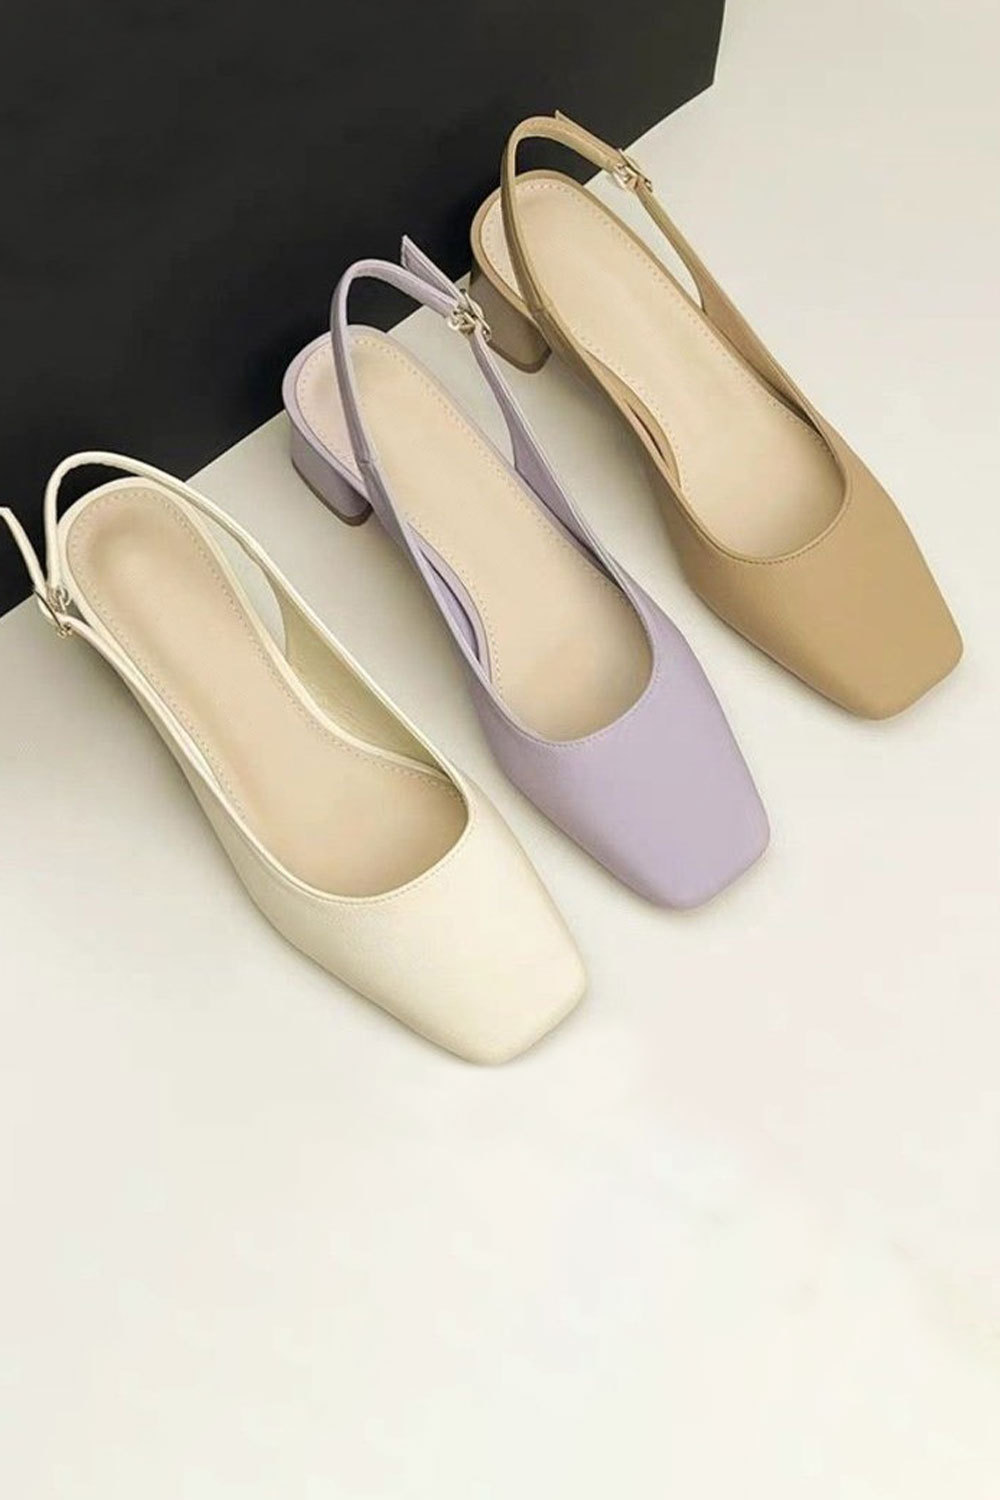 Daily Purple Square Toe Buckle Chunky Heel PU Leather Sandals